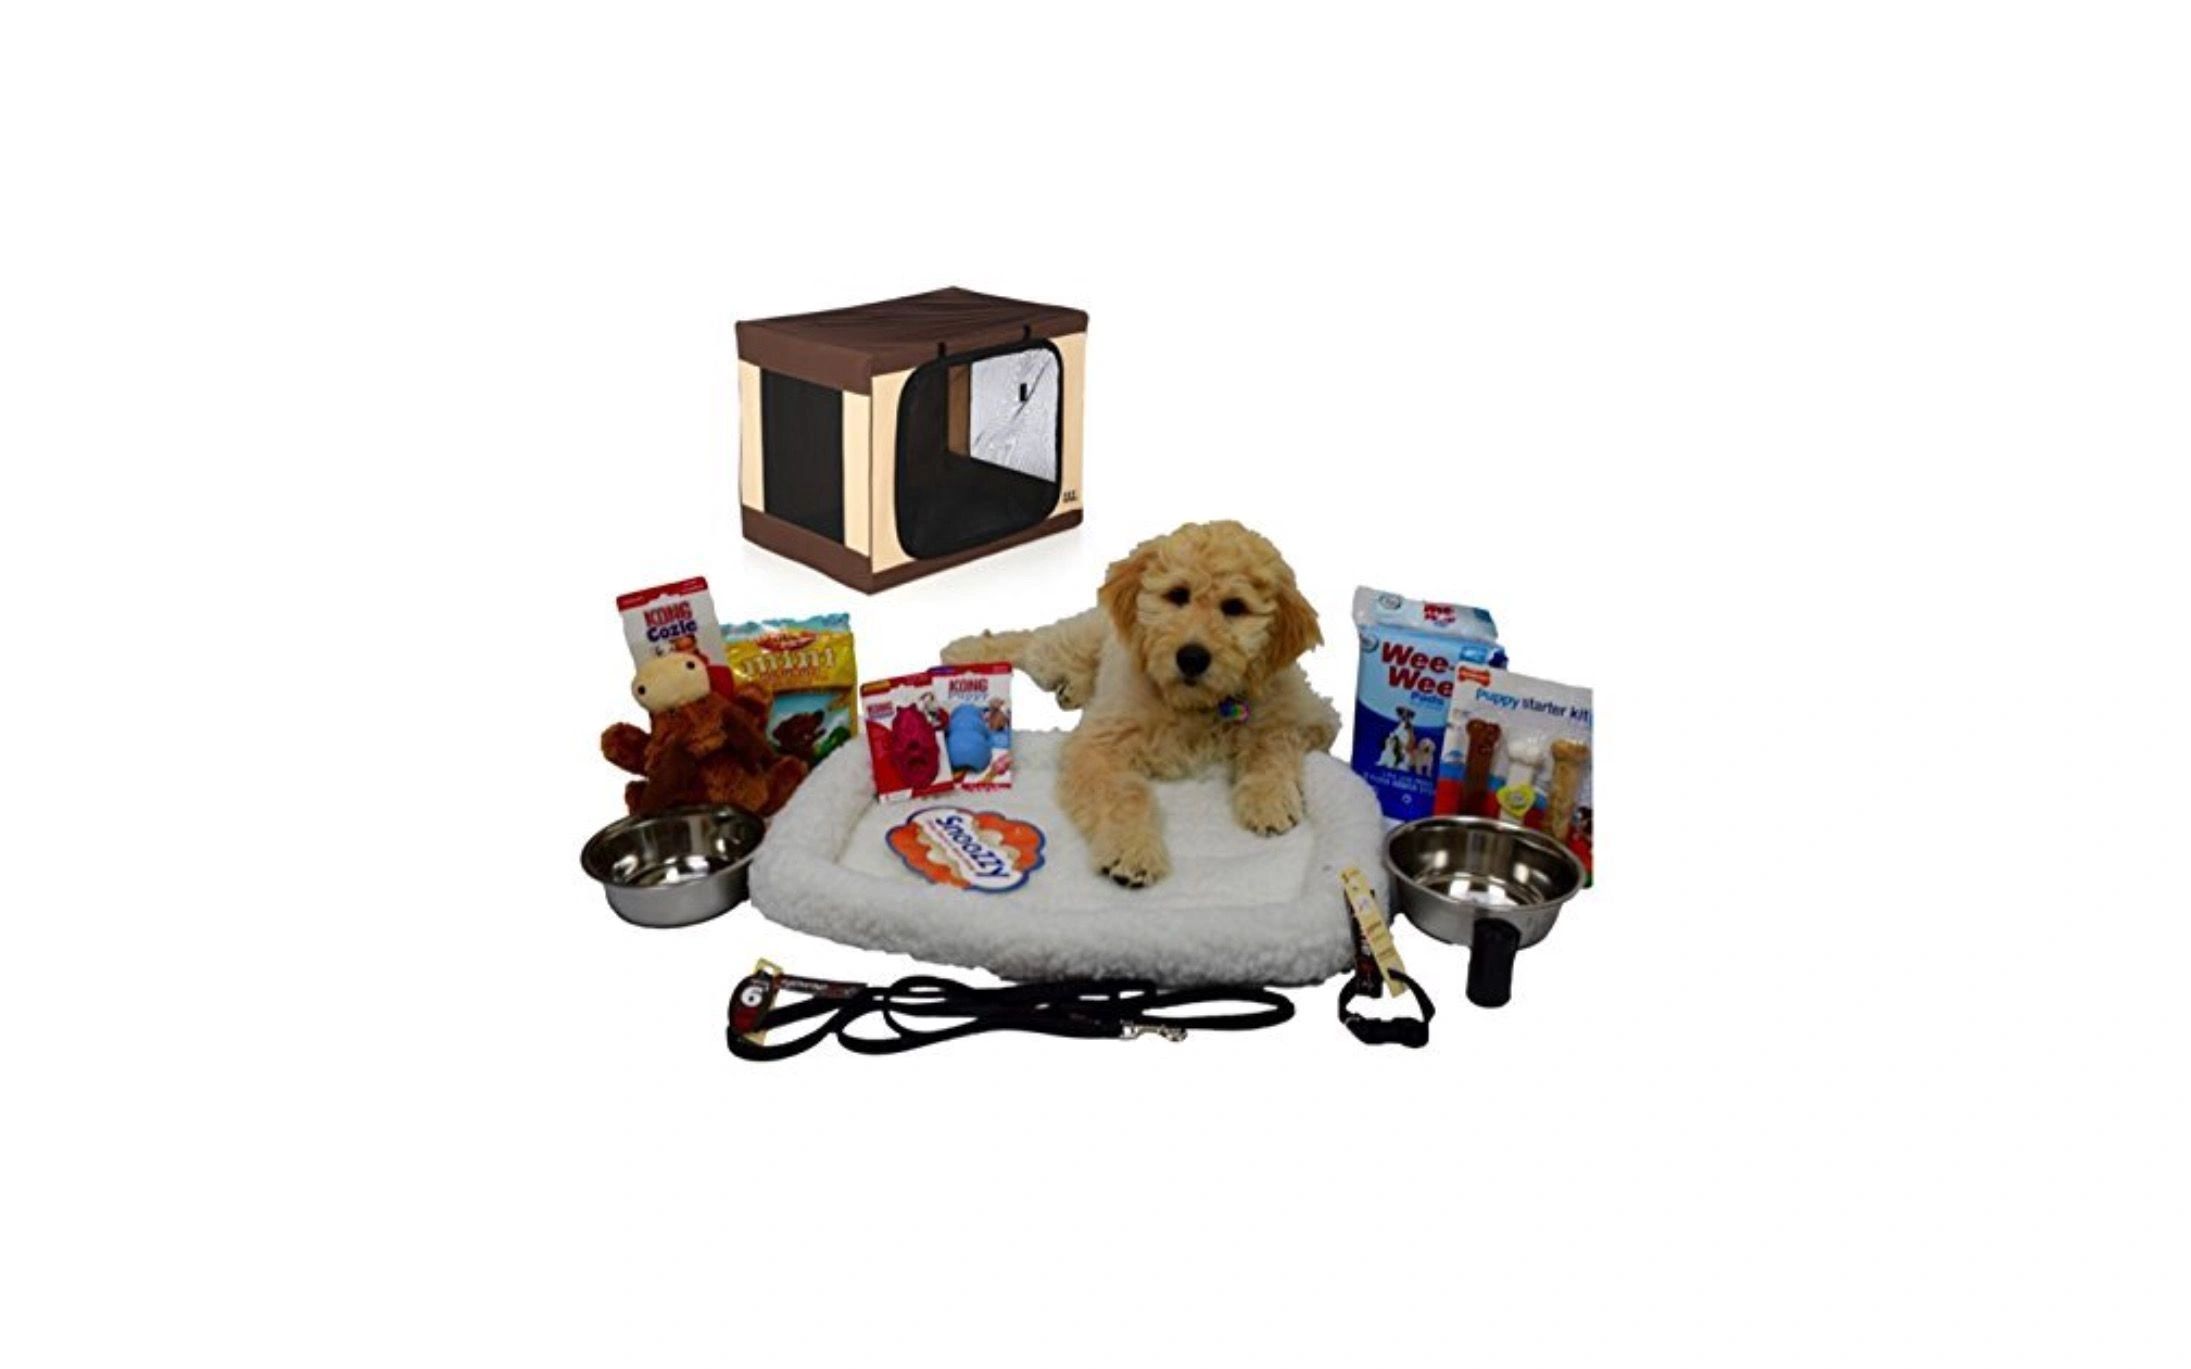  KONG - Puppy Starter Dog Toy Kit - Includes Puppy